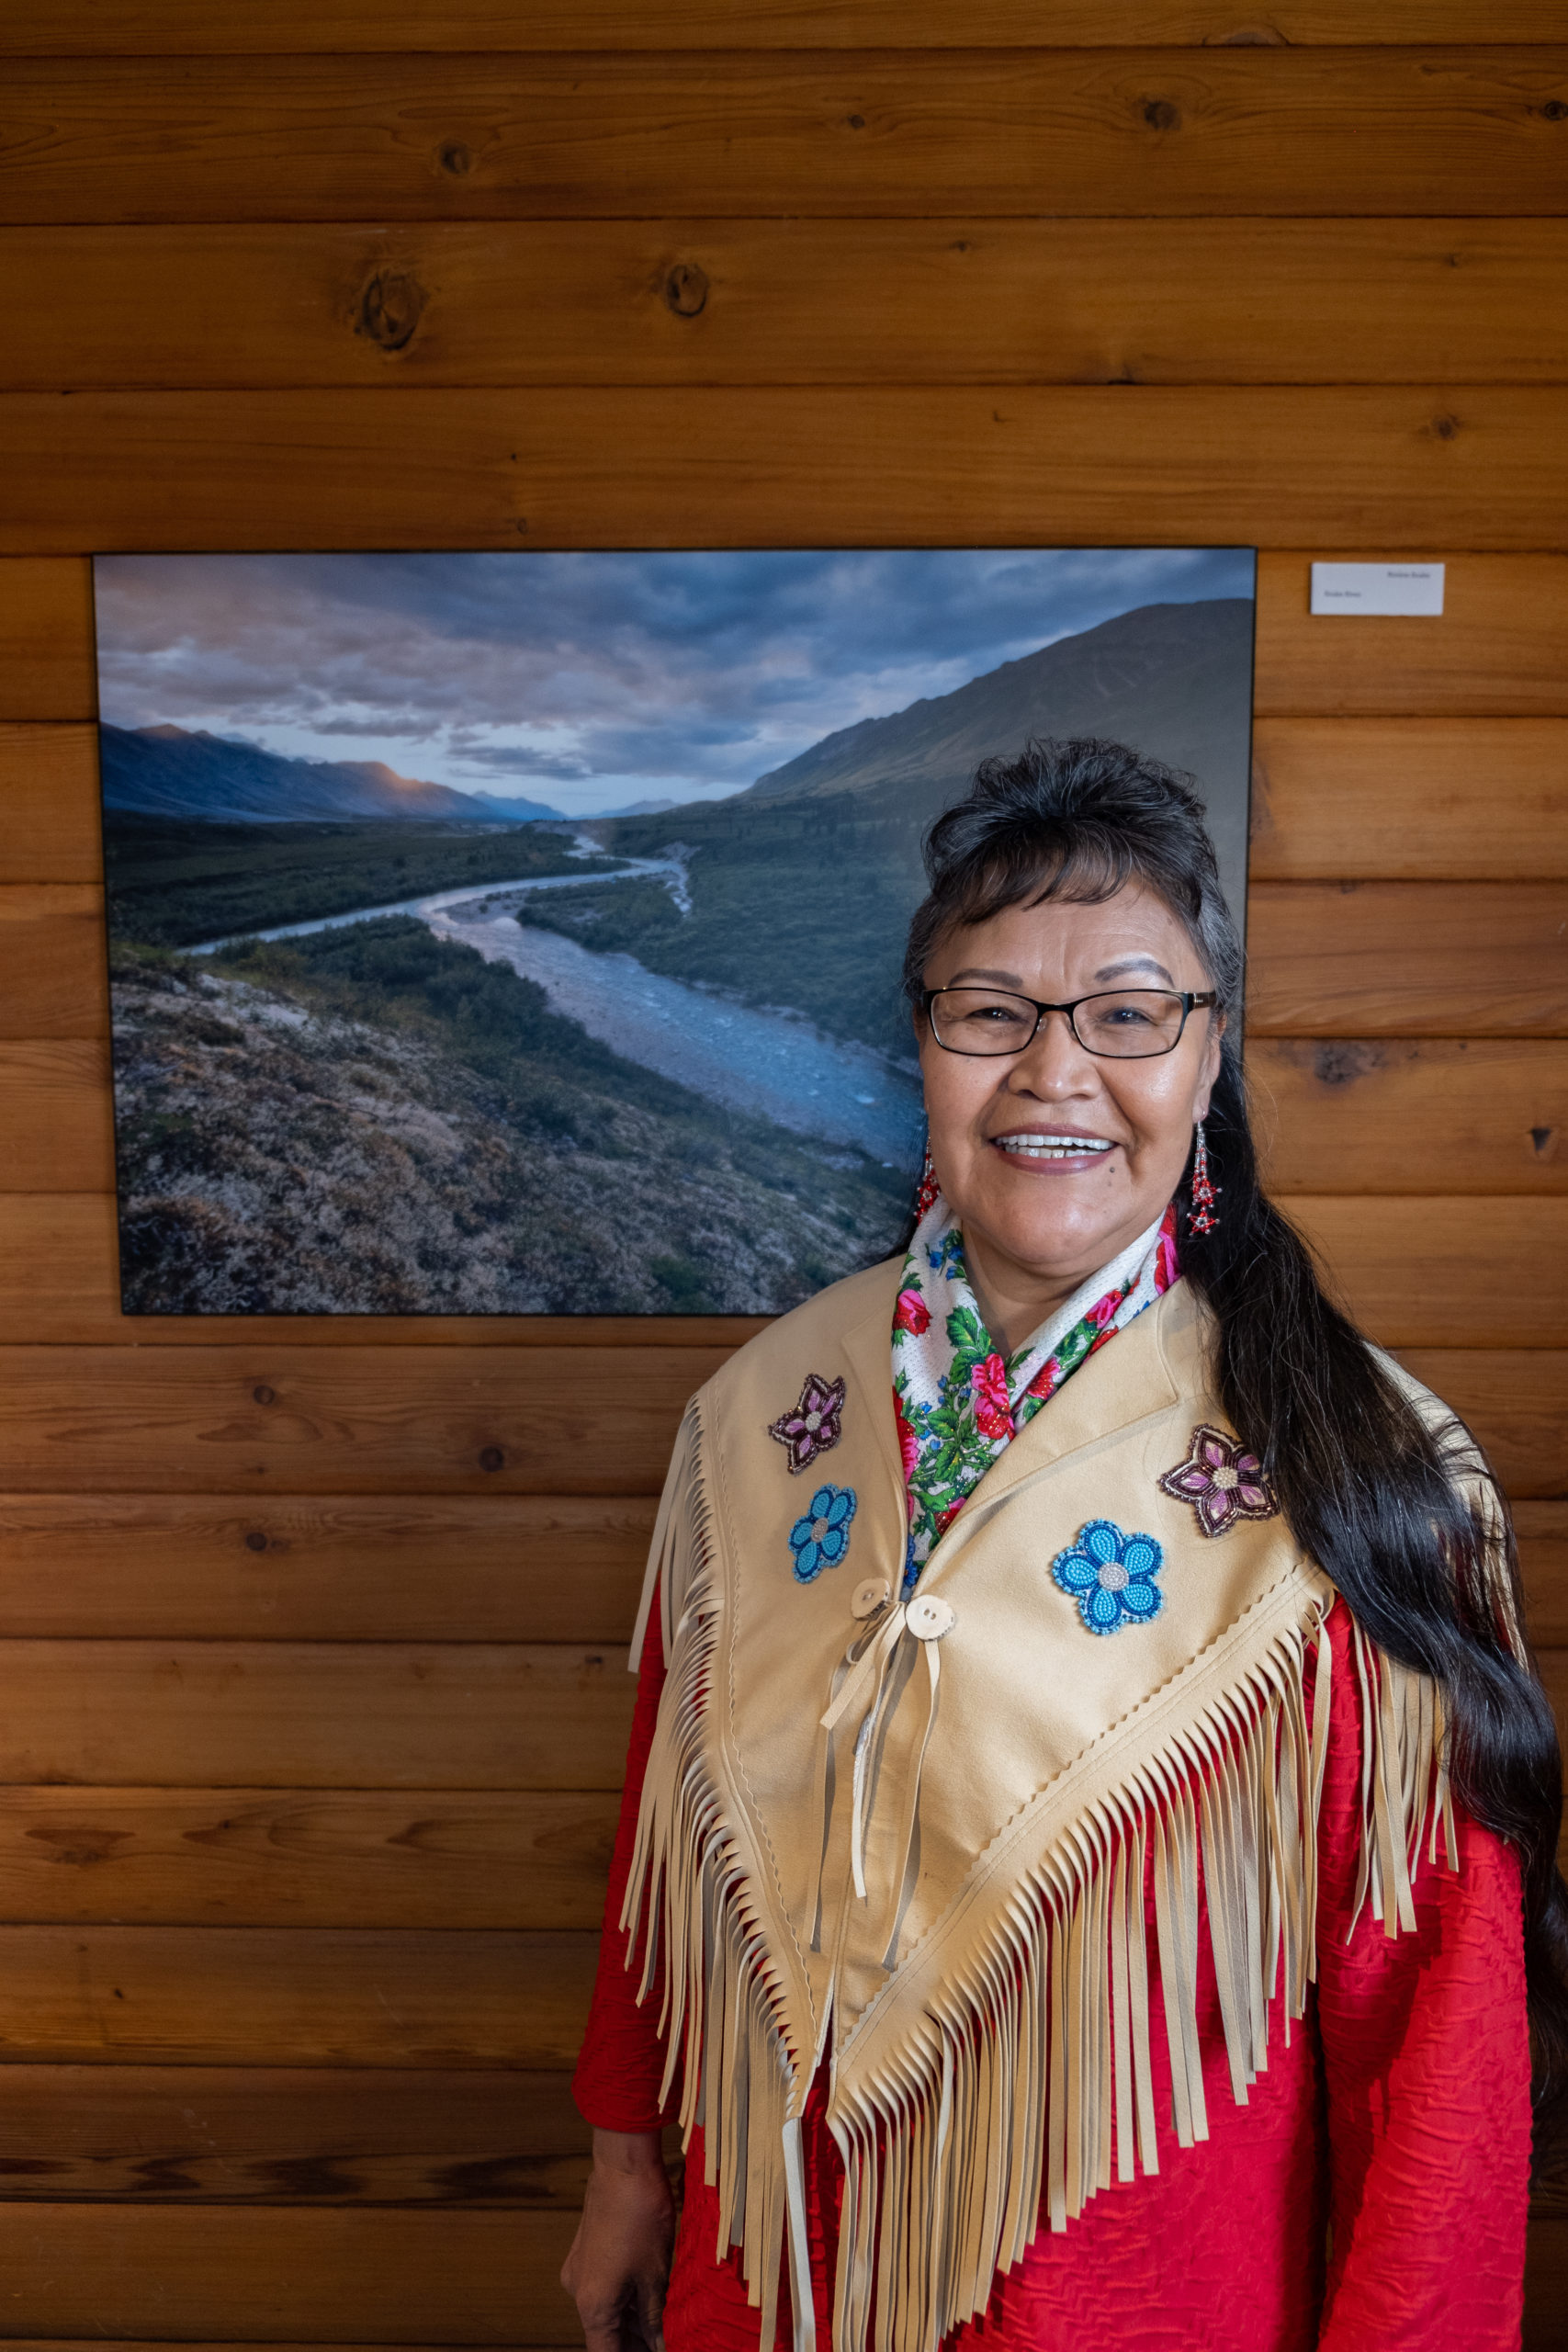 Award winner Lorrain Netro stands next to photo of the Peel Watershed located in the Yukon